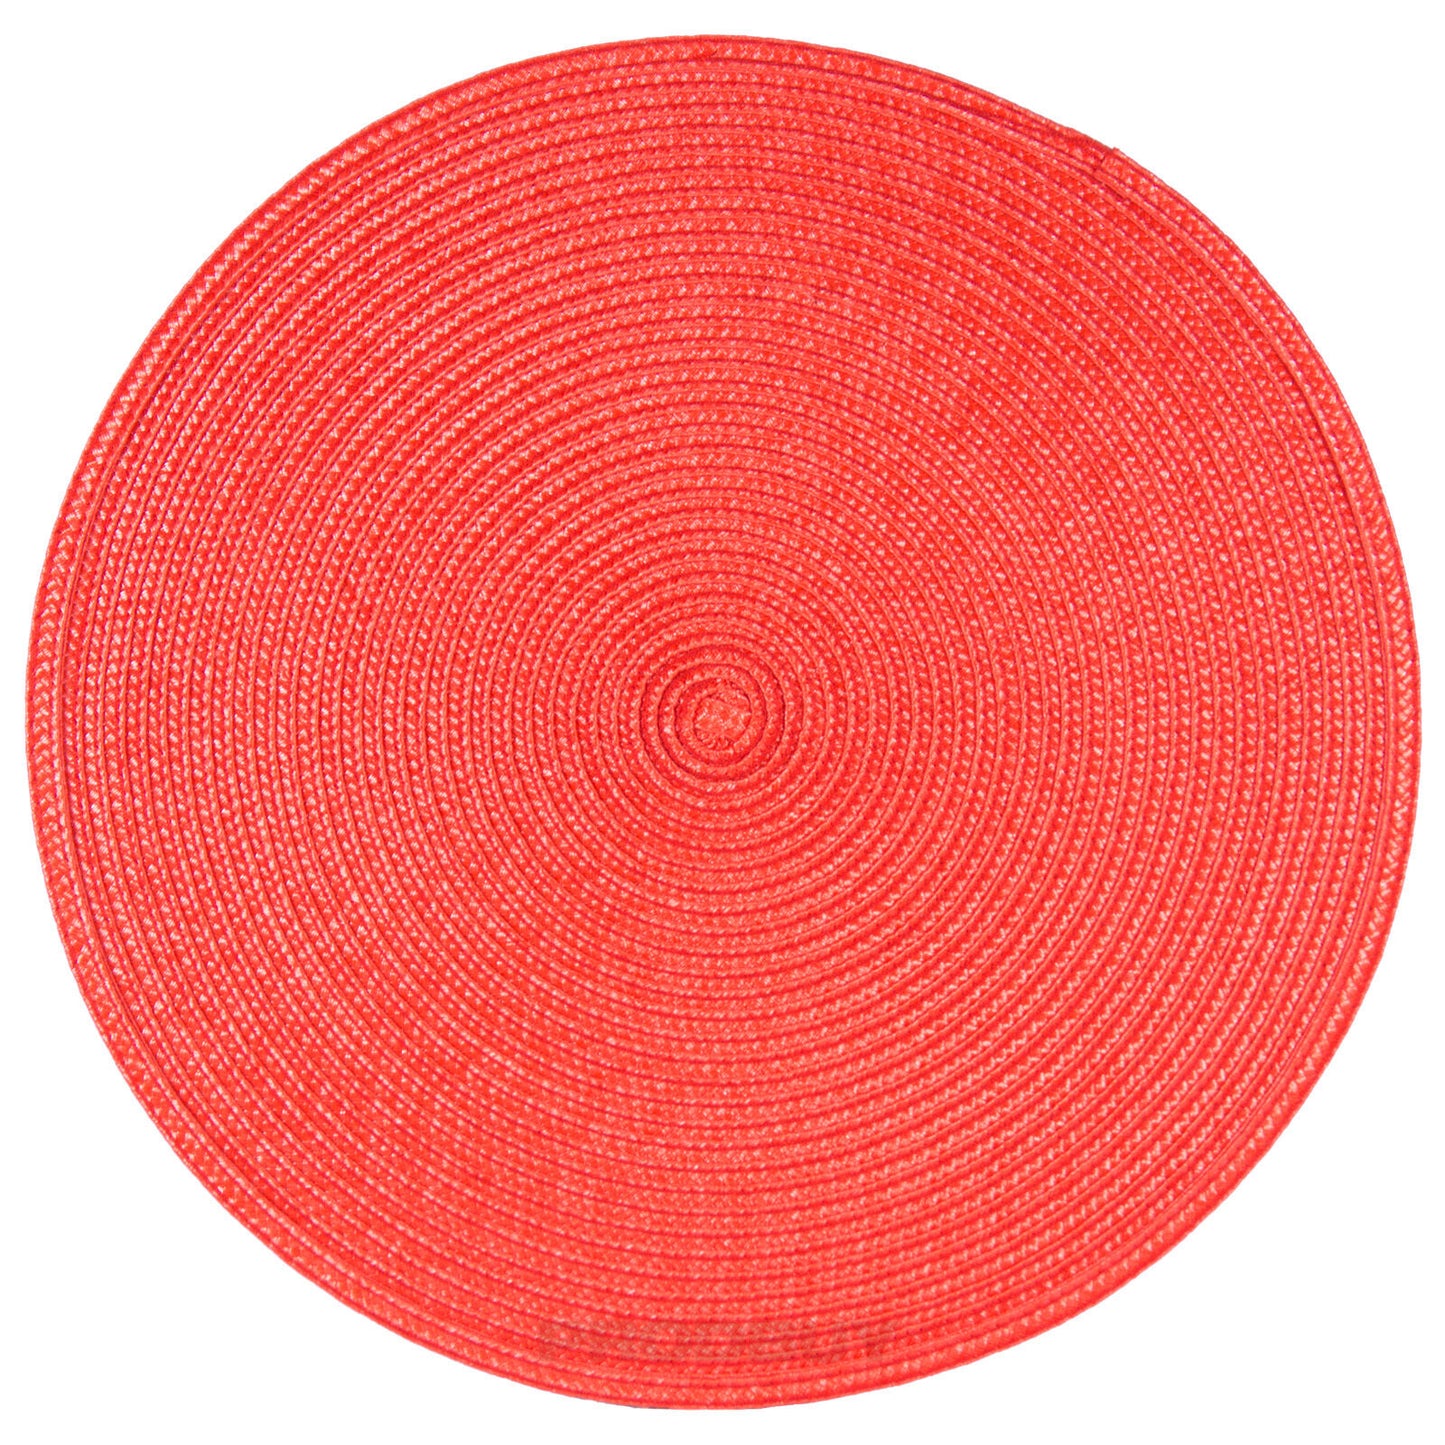 Set of 4 Round Woven Red Table Placemats